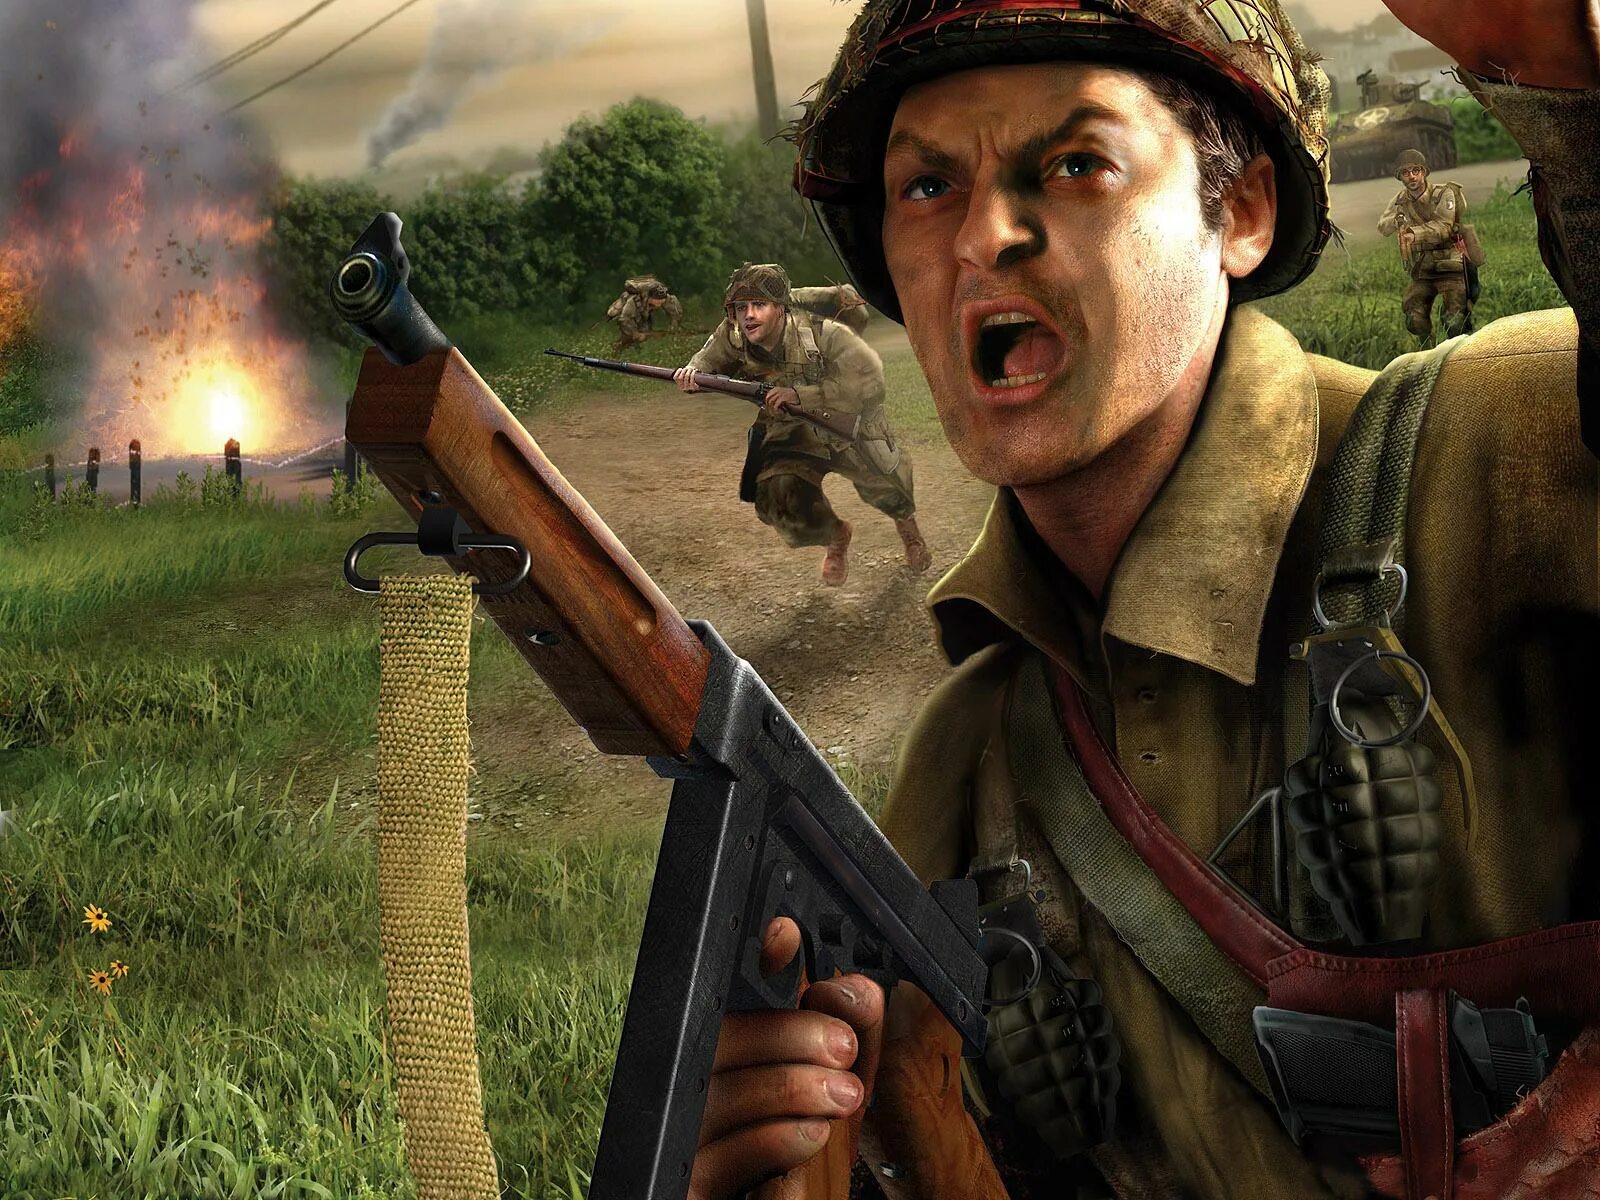 Игра мужики военные. Brothers in Arms: Road to Hill 30. Игра brothers in Arms Road to Hill 30. Brothers in Arms: earned in Blood. Brothers in Arms: Hell’s Highway.